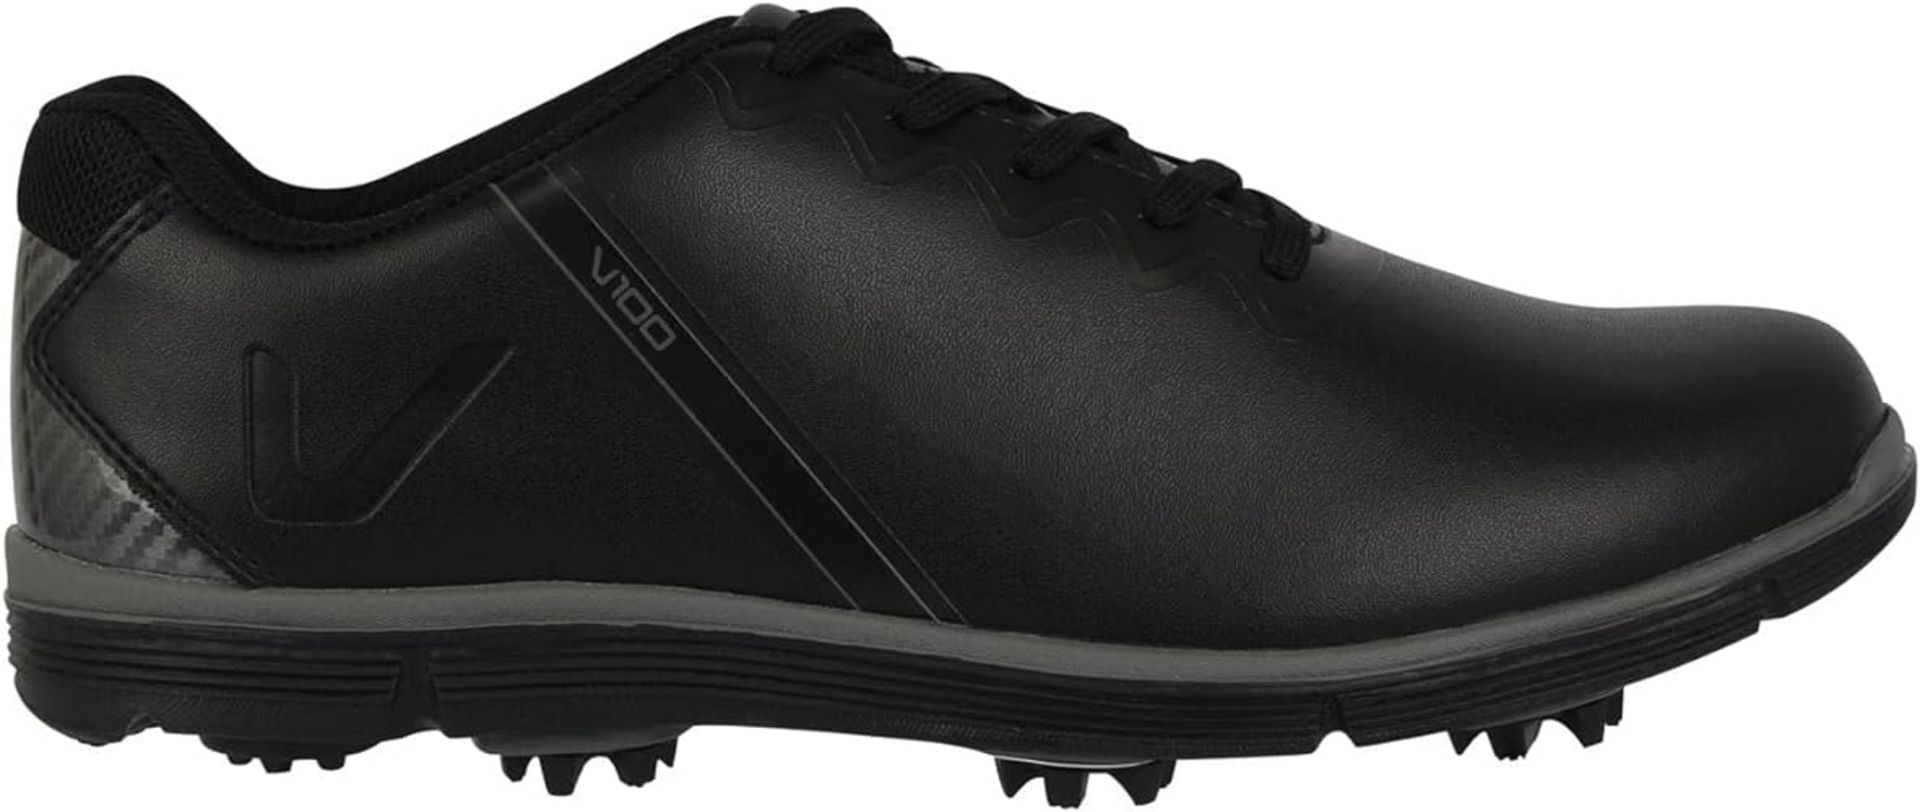 2 X BRAND NEW PAIRS OF SLAZENGER BLACK V100 PROFESSIONAL GOLF SHOES SIZE 9 RRP £89 EACH S1RA